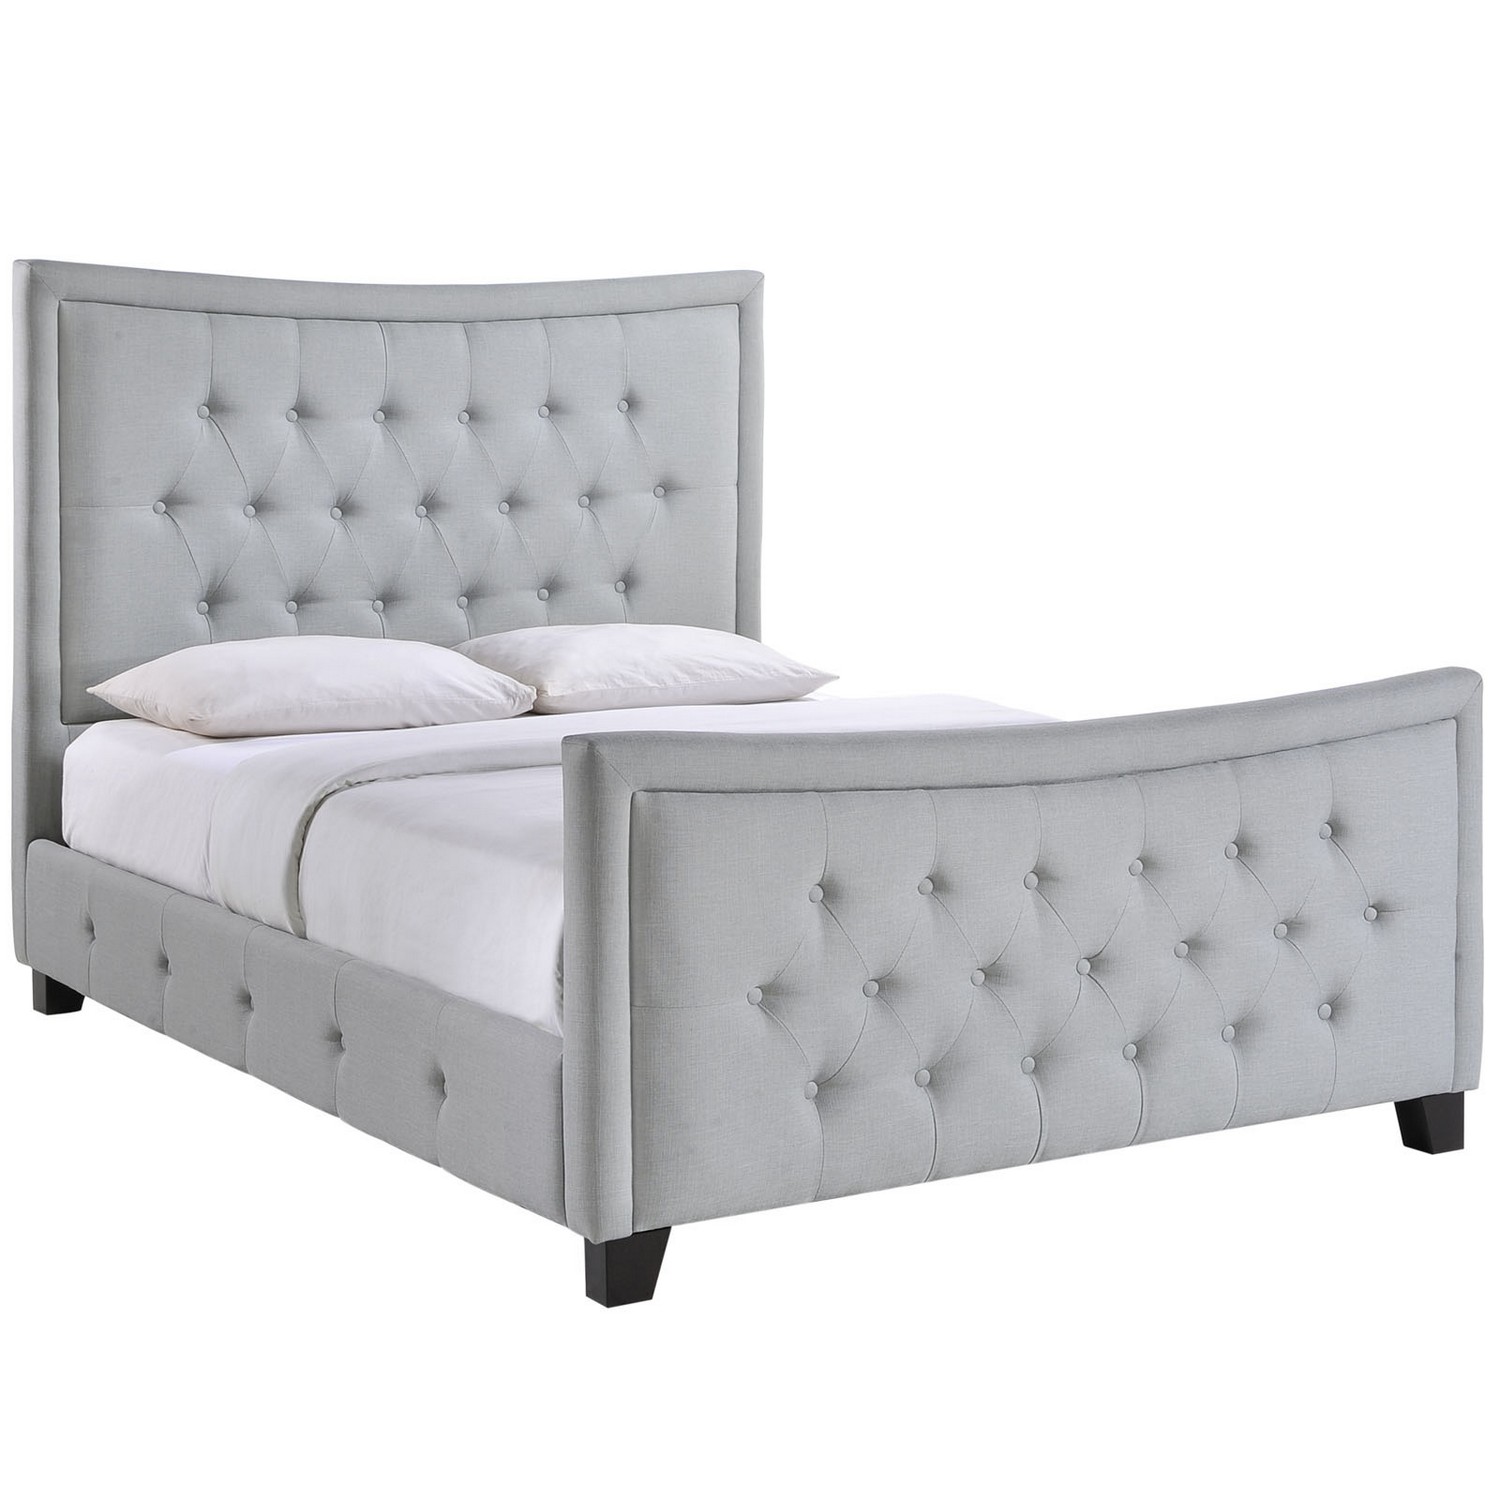 Modway Claire Queen Bed - Sky Gray